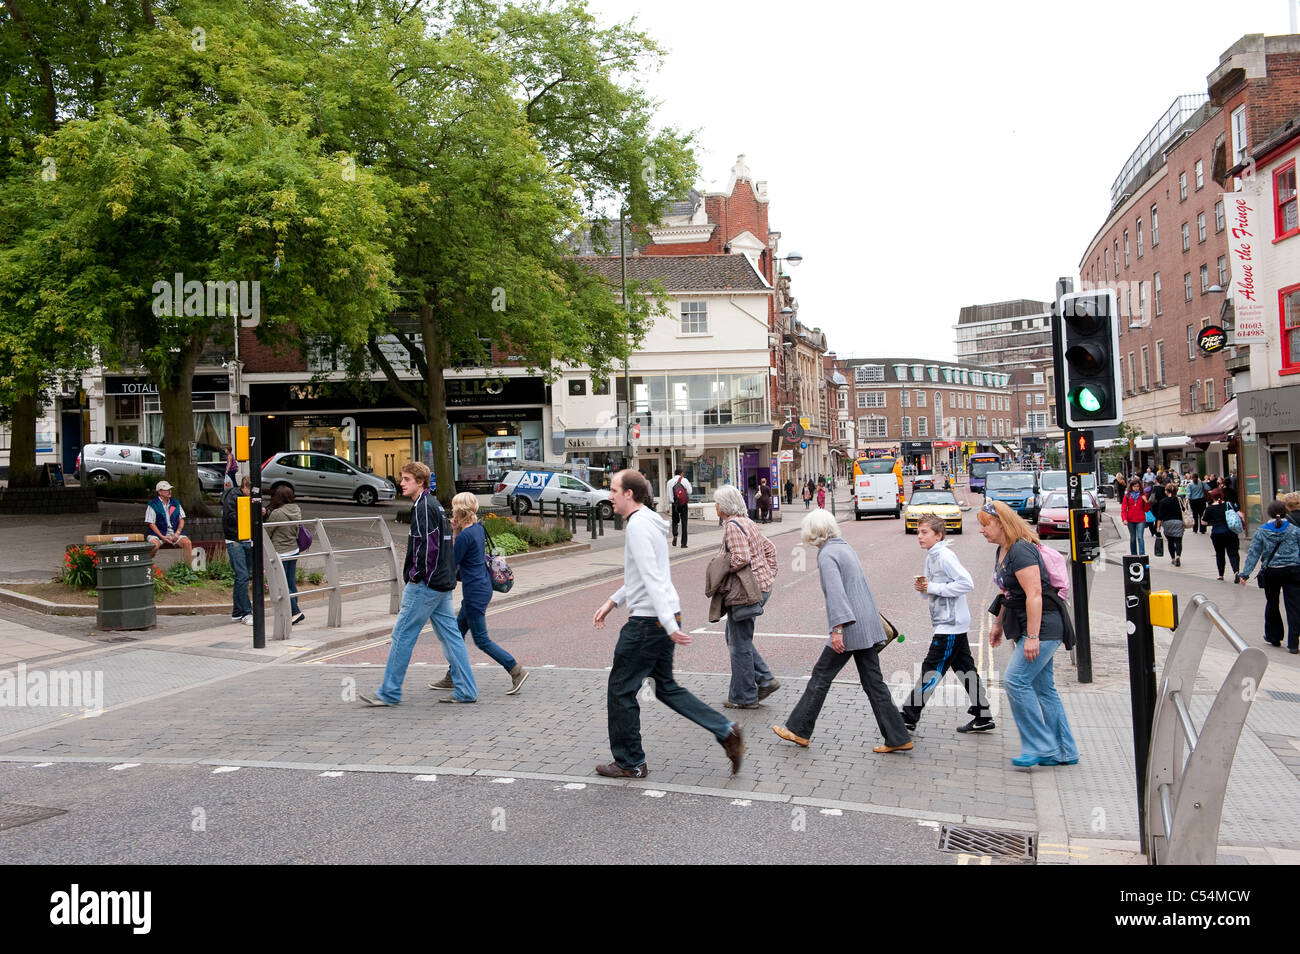 People crossing a pedestrian crossing whilst the traffic lights are still on green in Norwich city centre, England. Stock Photo